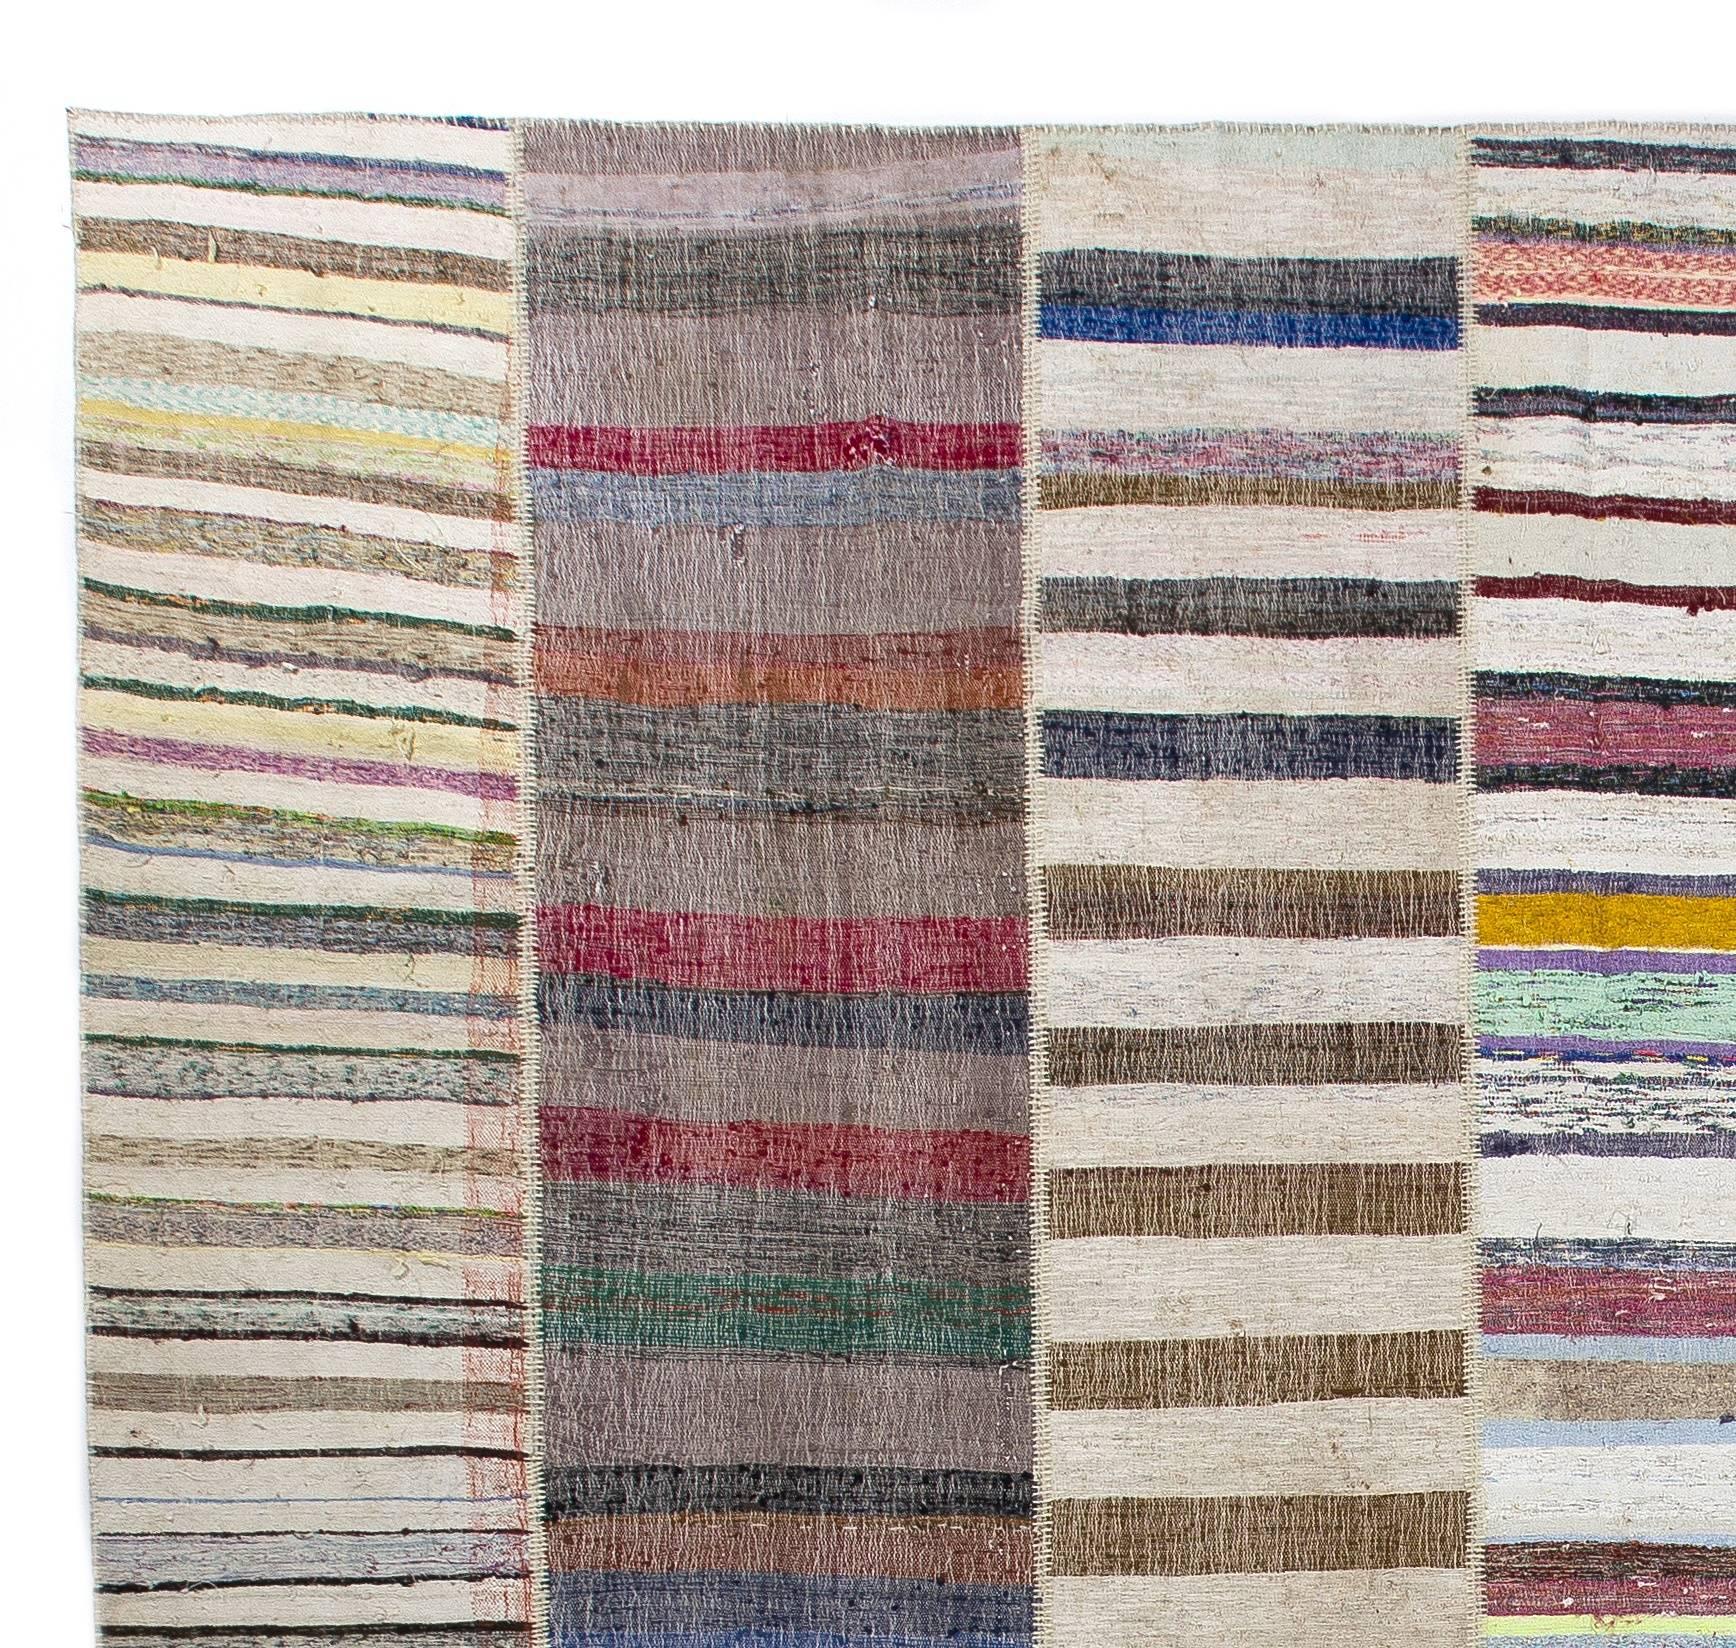 Size: 13.9 x 17 (Adjustable).

These authentic flat-weaves (Kilims) from Eastern Turkey were handwoven by Nomads in mid-20th century to be used as floor coverings in their tents.

They were made to use for everyday life rather than re-sale and